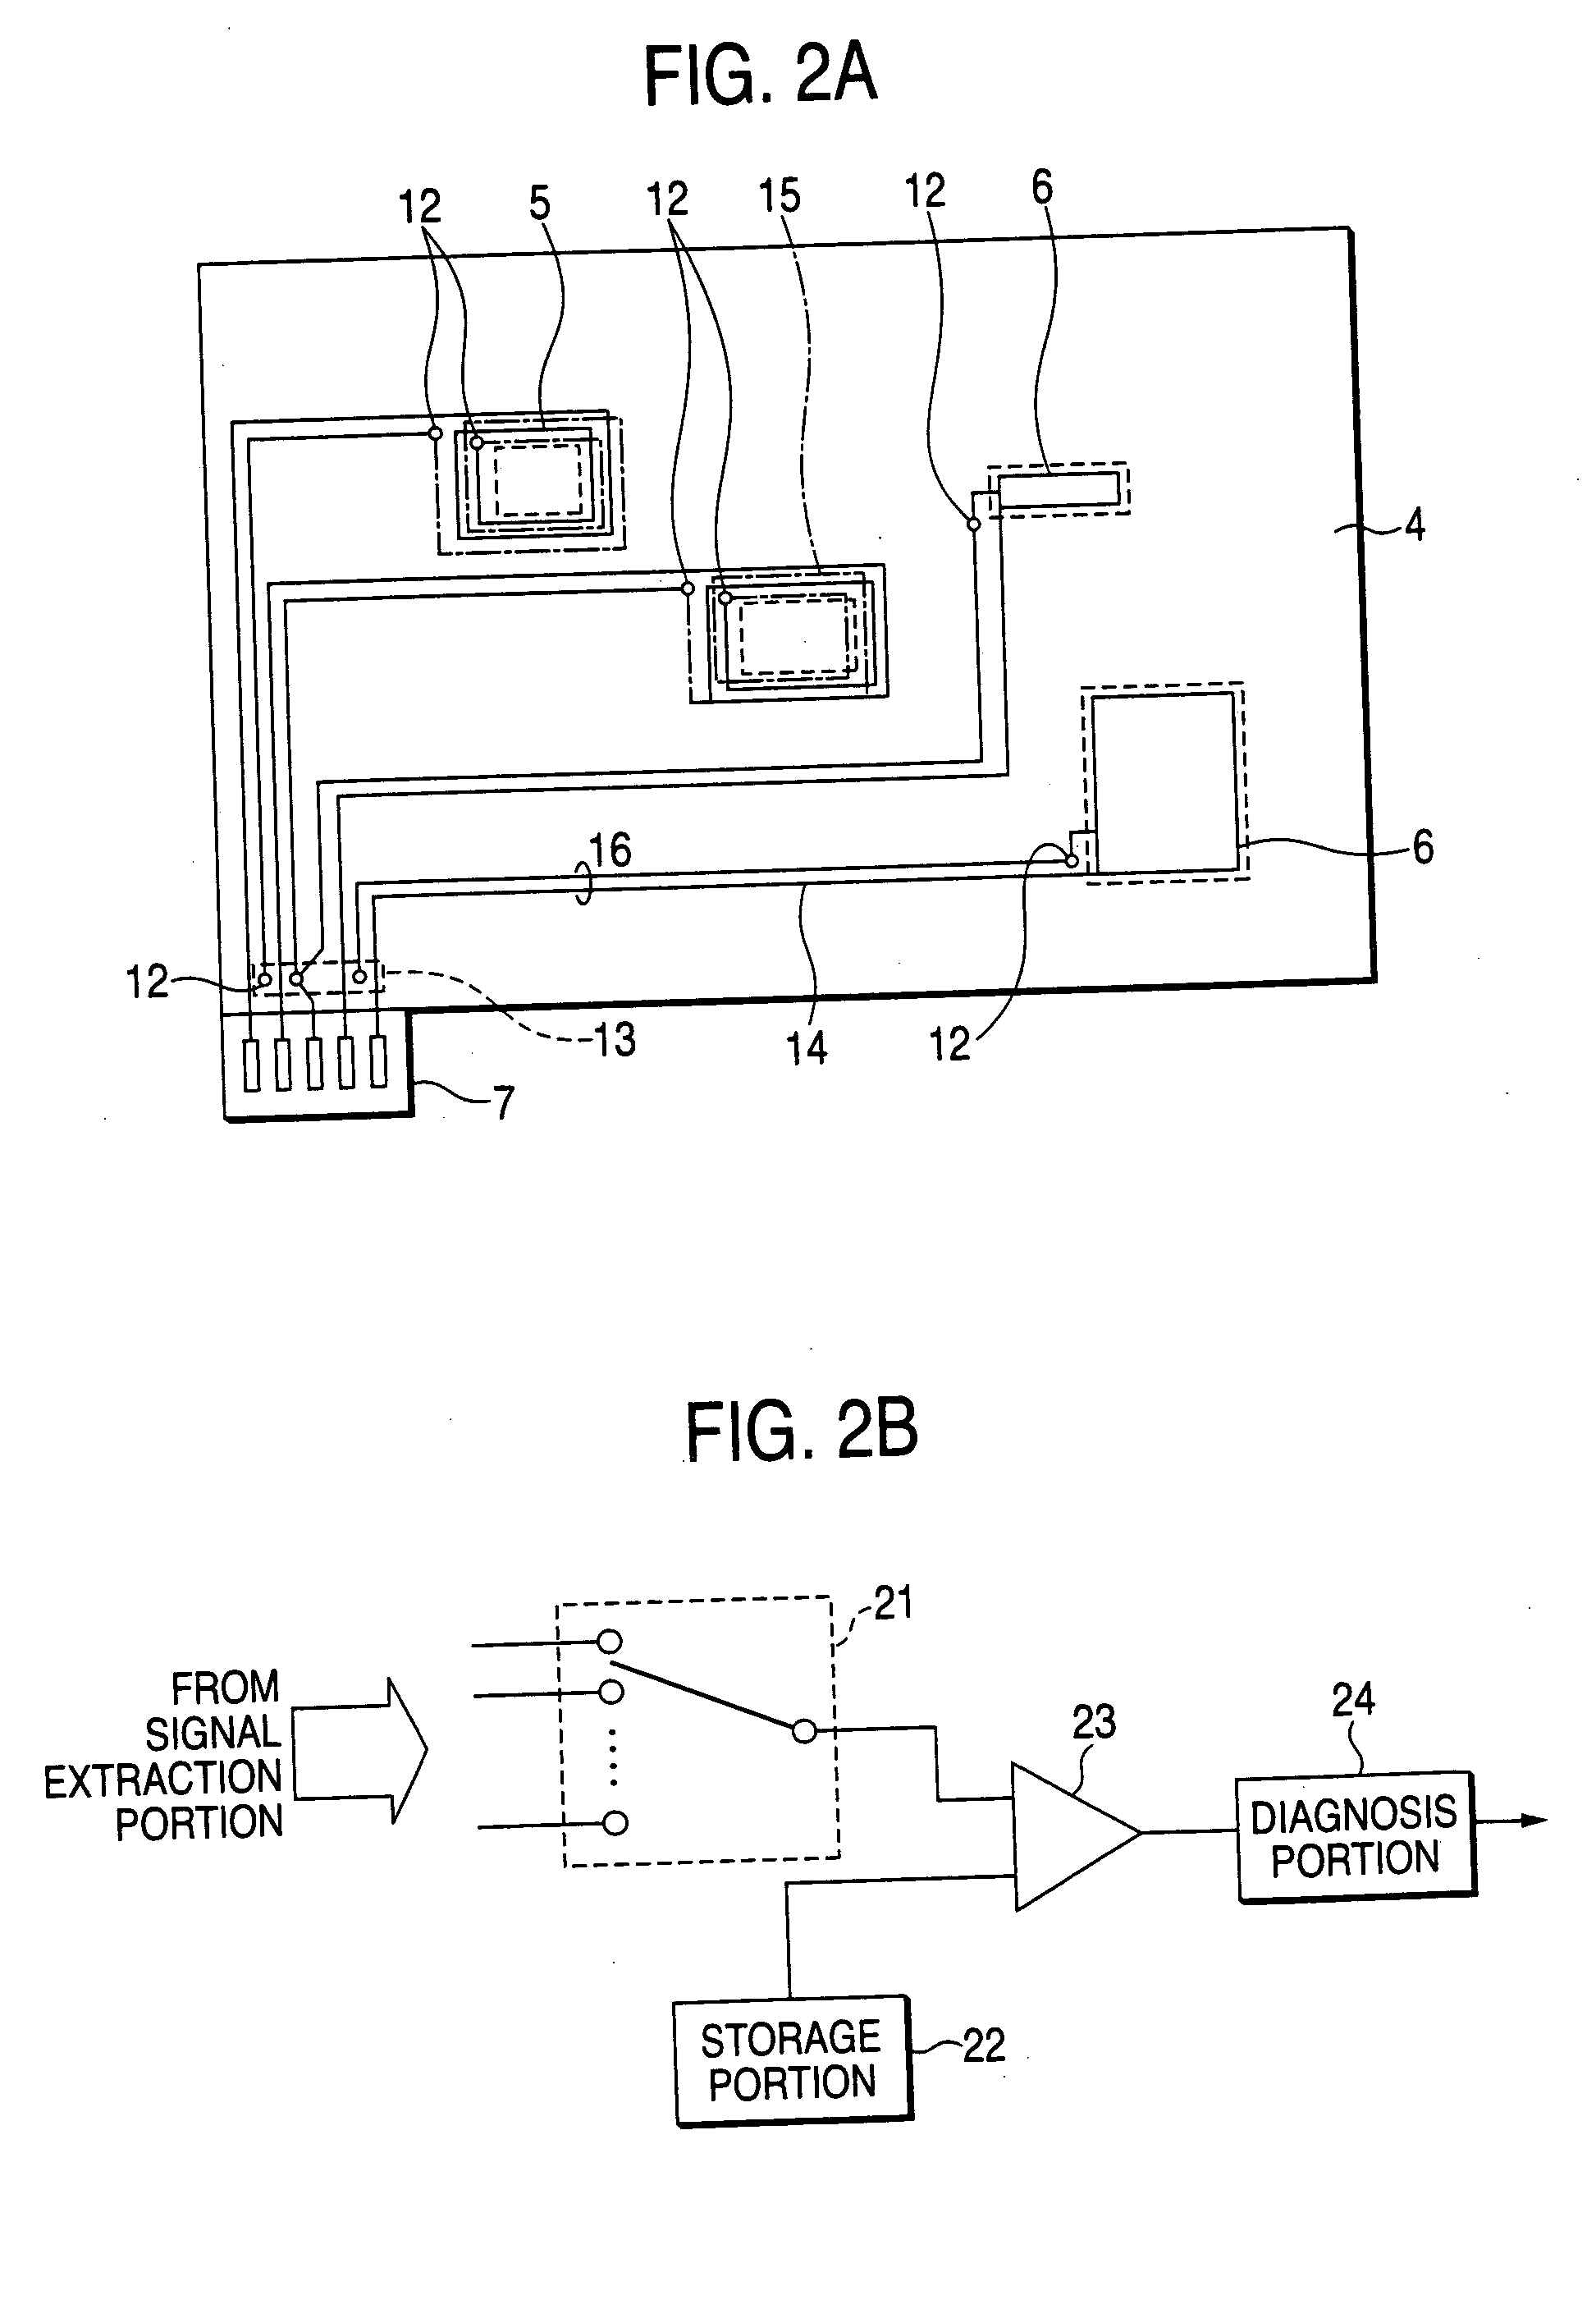 Circuit board inspection device